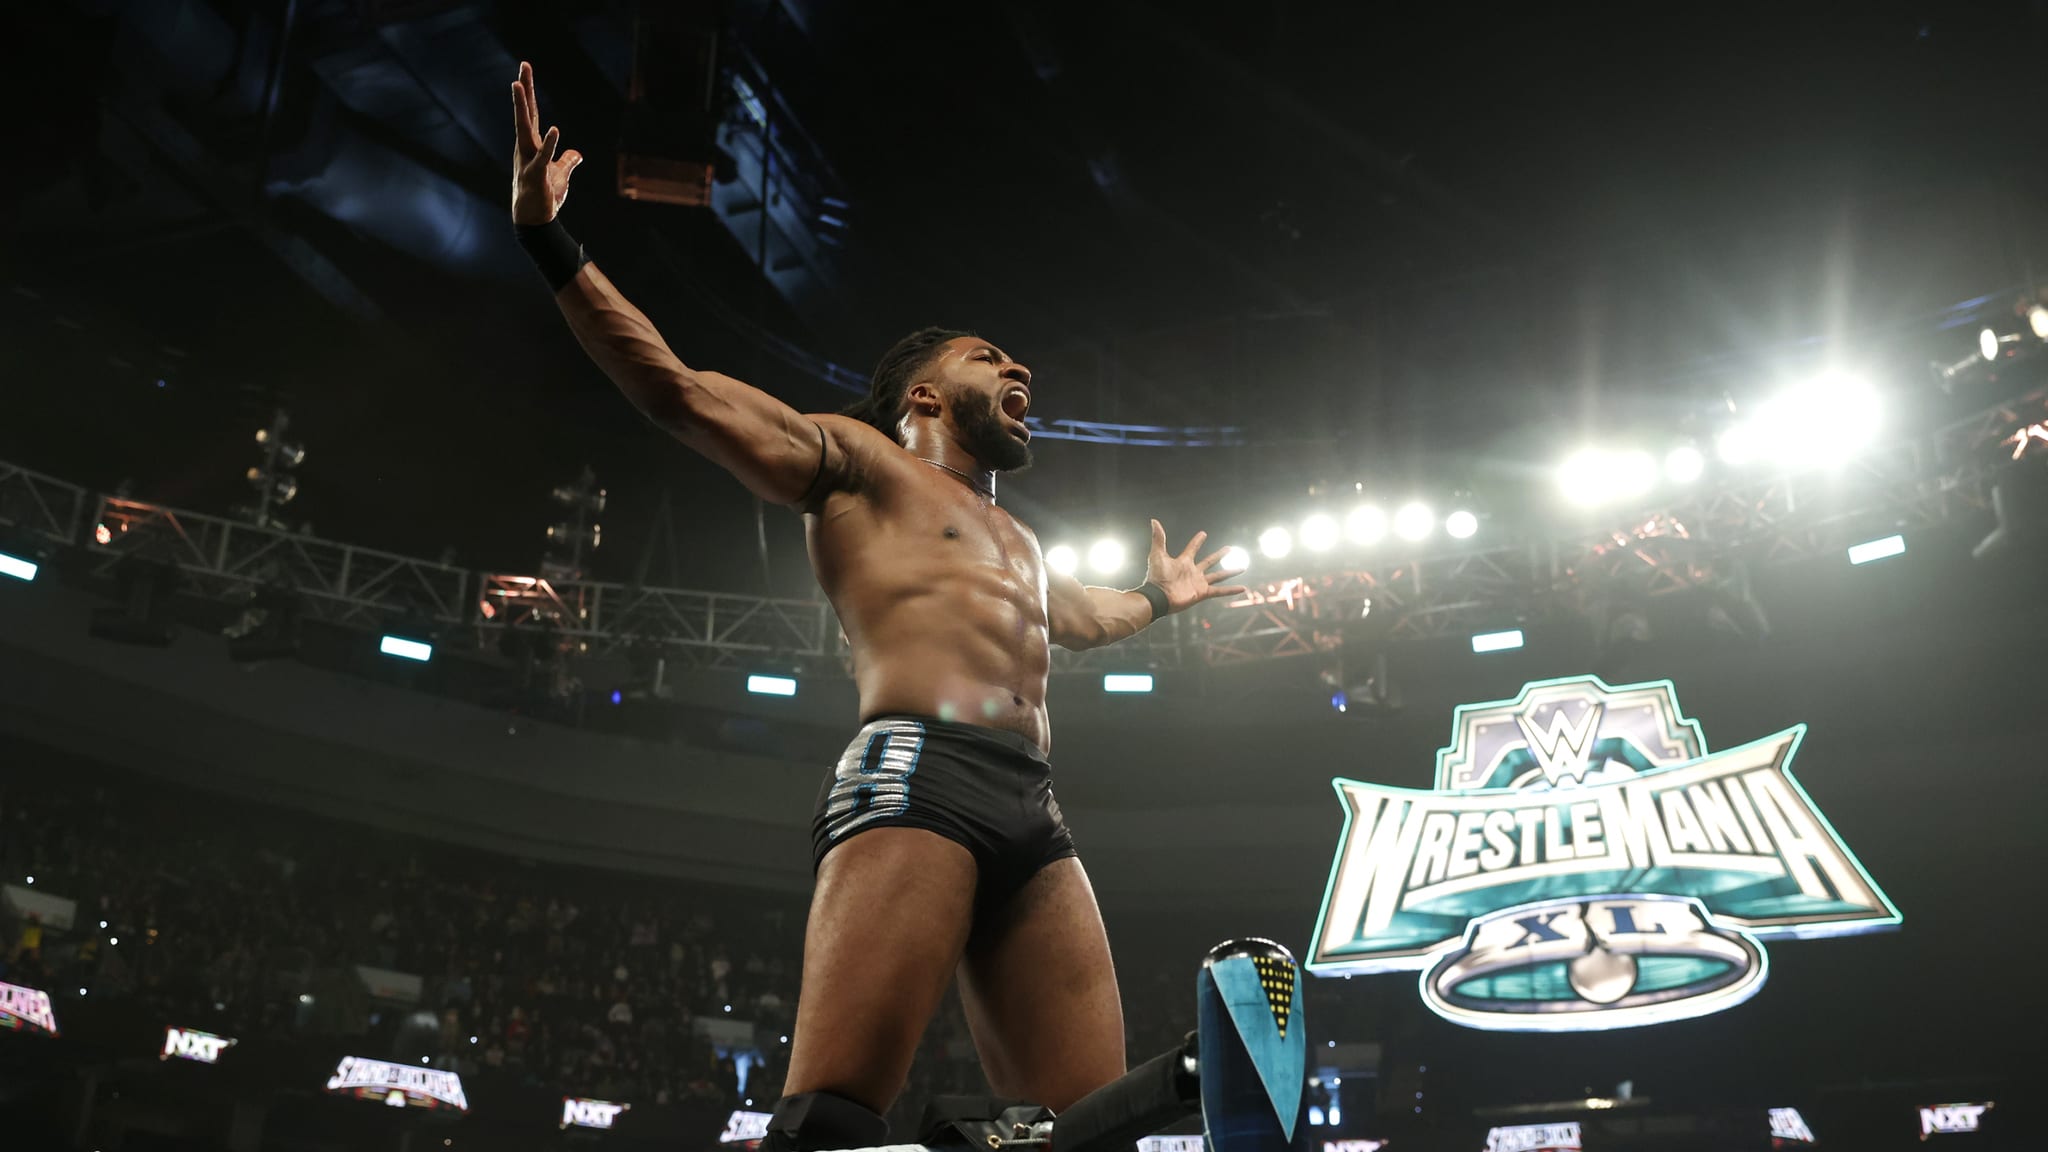 WWE superstar was once a fledgling WR with the Eagles 